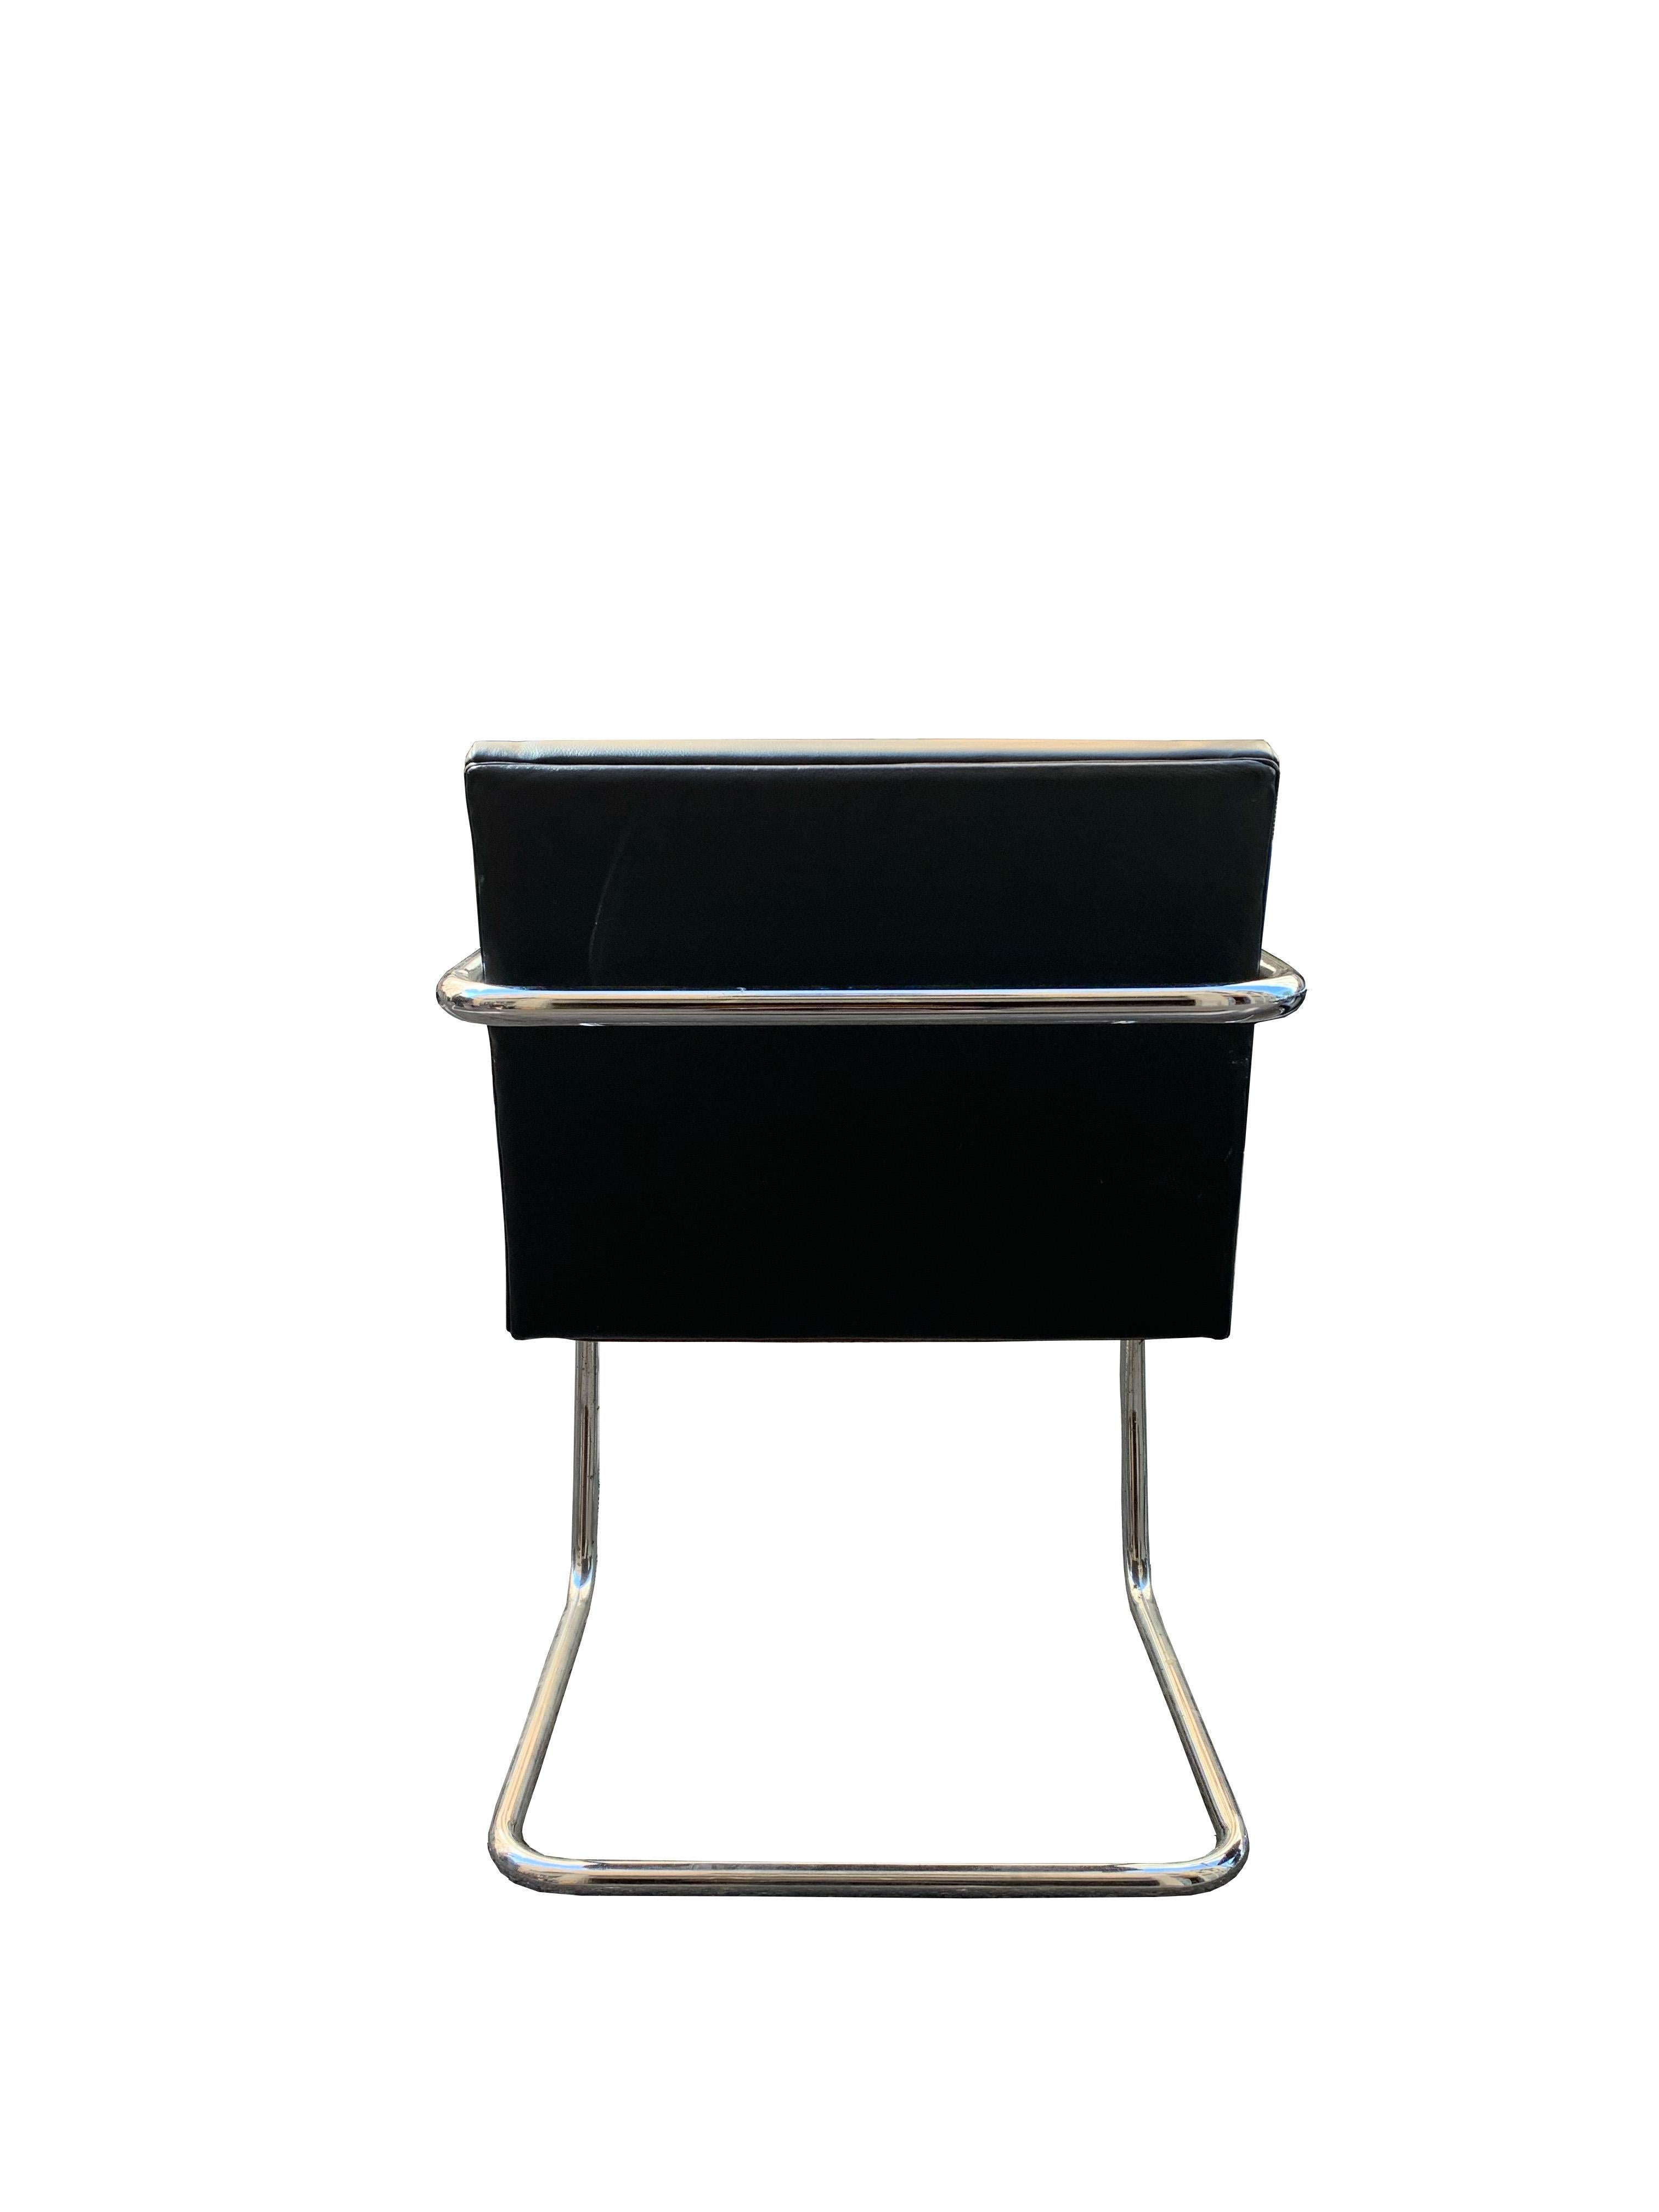 Six Ludwig Mies van der Rohe Brno Tubular Chairs/Desk Chairs for Knoll, c1970 In Good Condition For Sale In Renens, CH